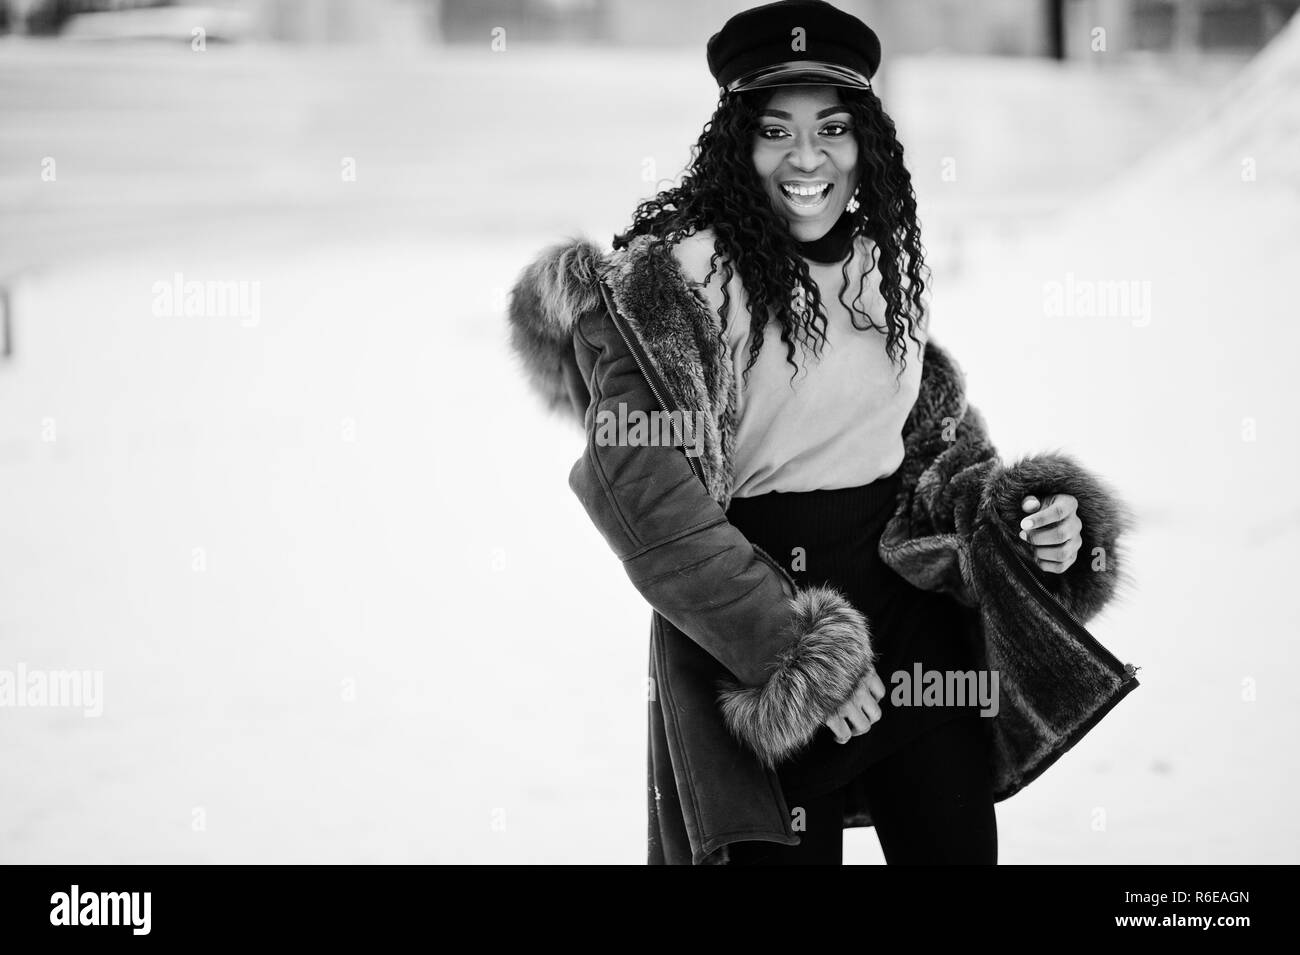 African american woman in sheepskin coat and cap posed at winter day against snowy background. Stock Photo